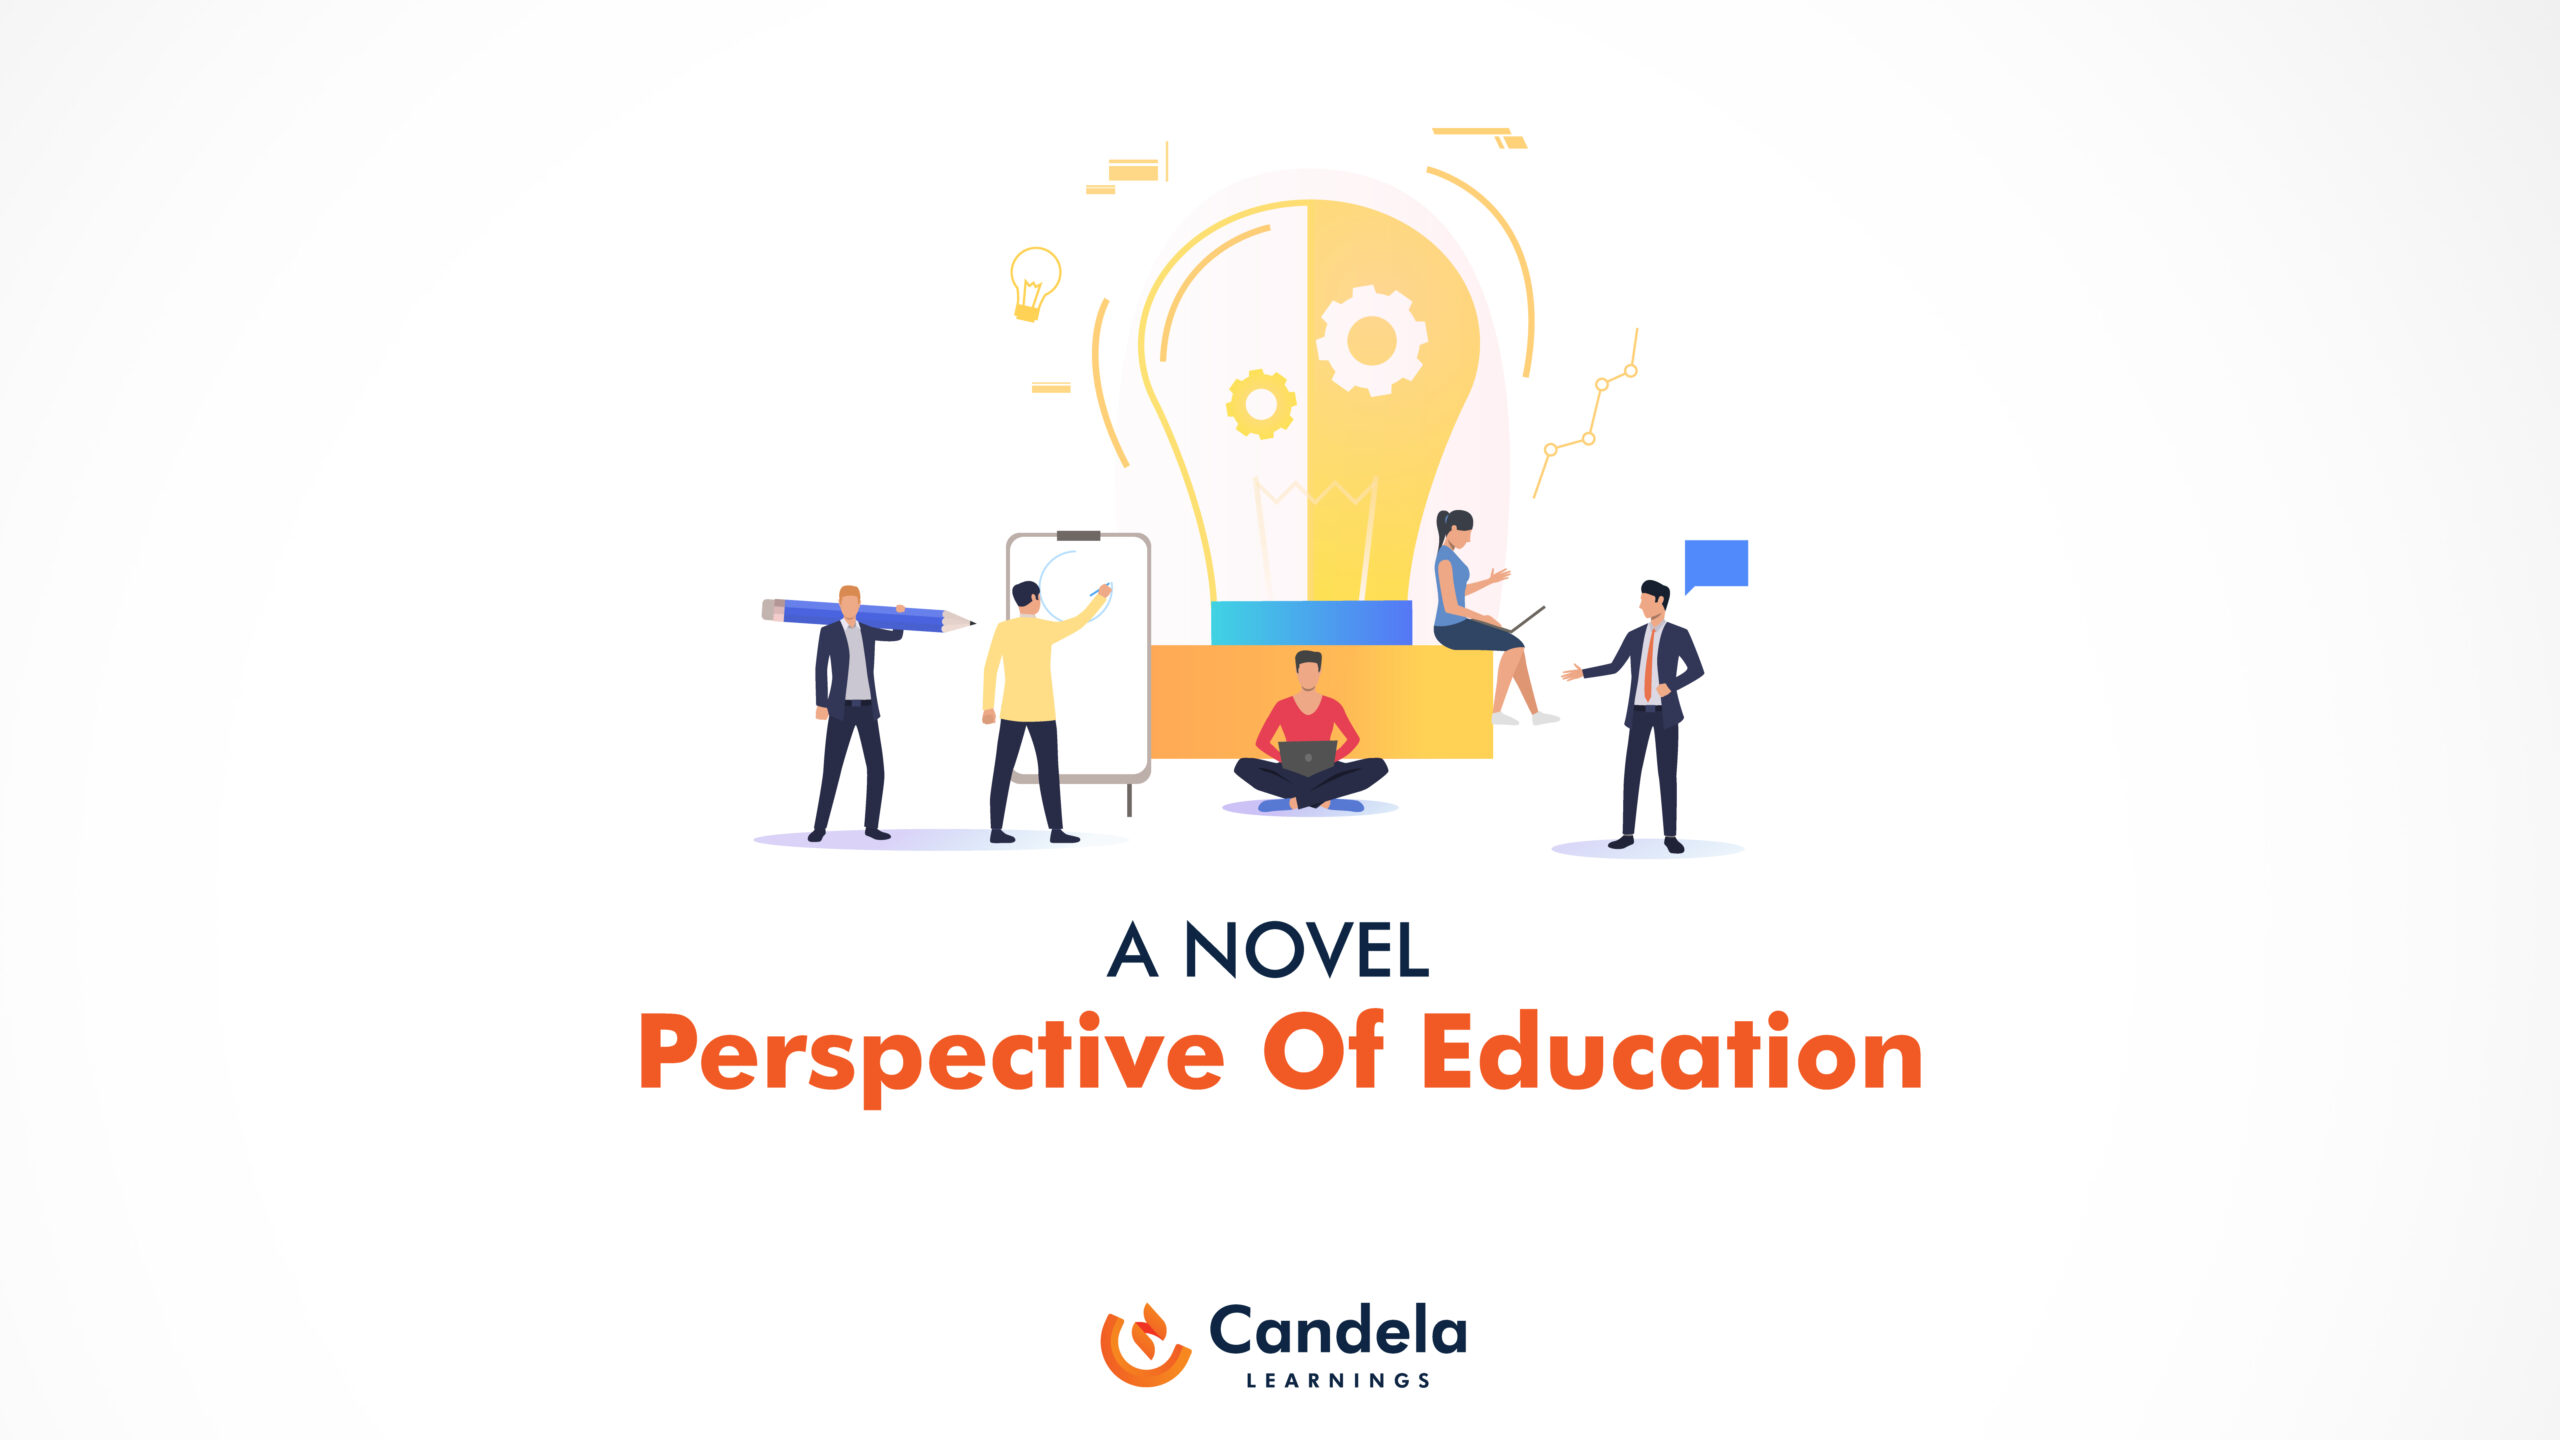 A novel perspective of education